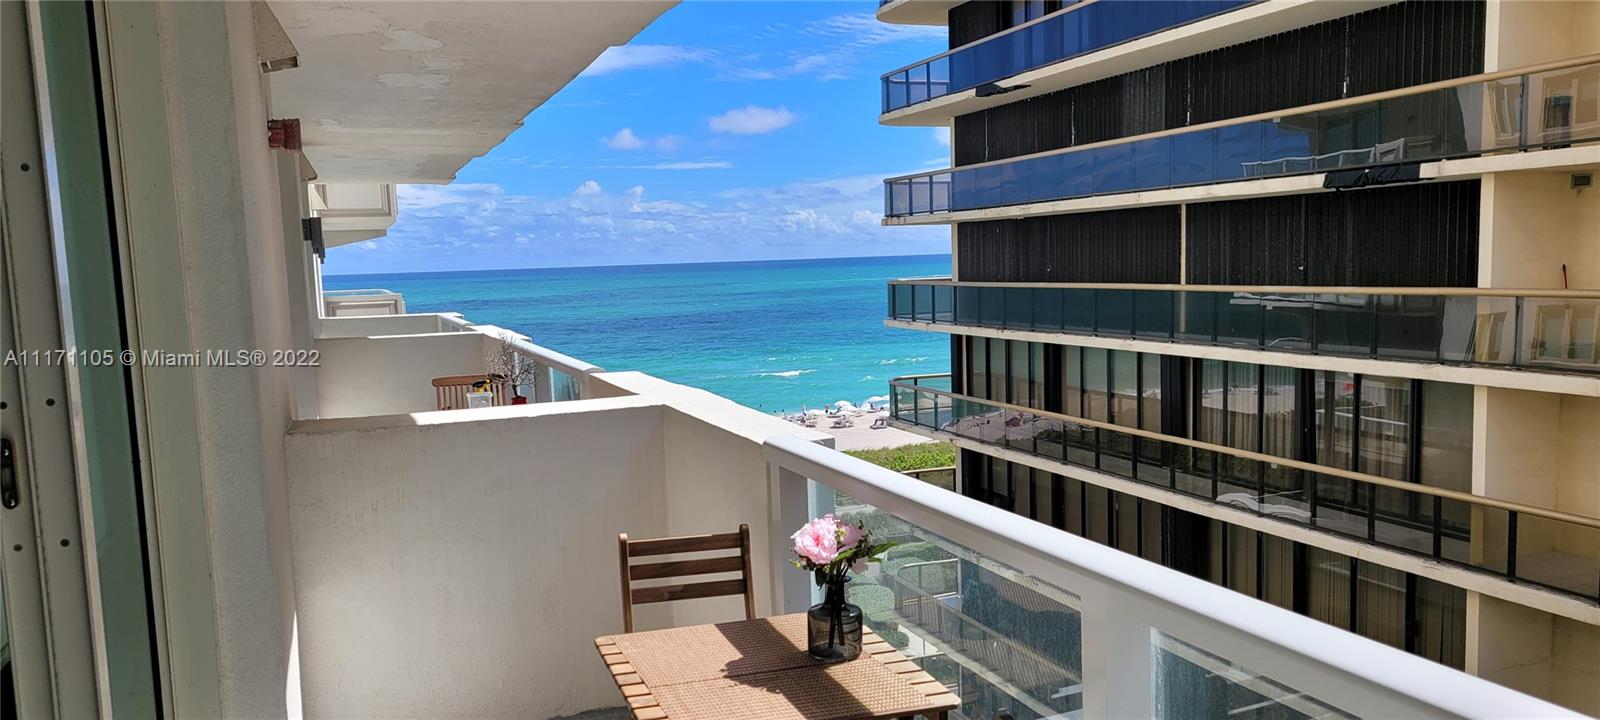 9499  Collins Ave #705 For Sale A11171105, FL